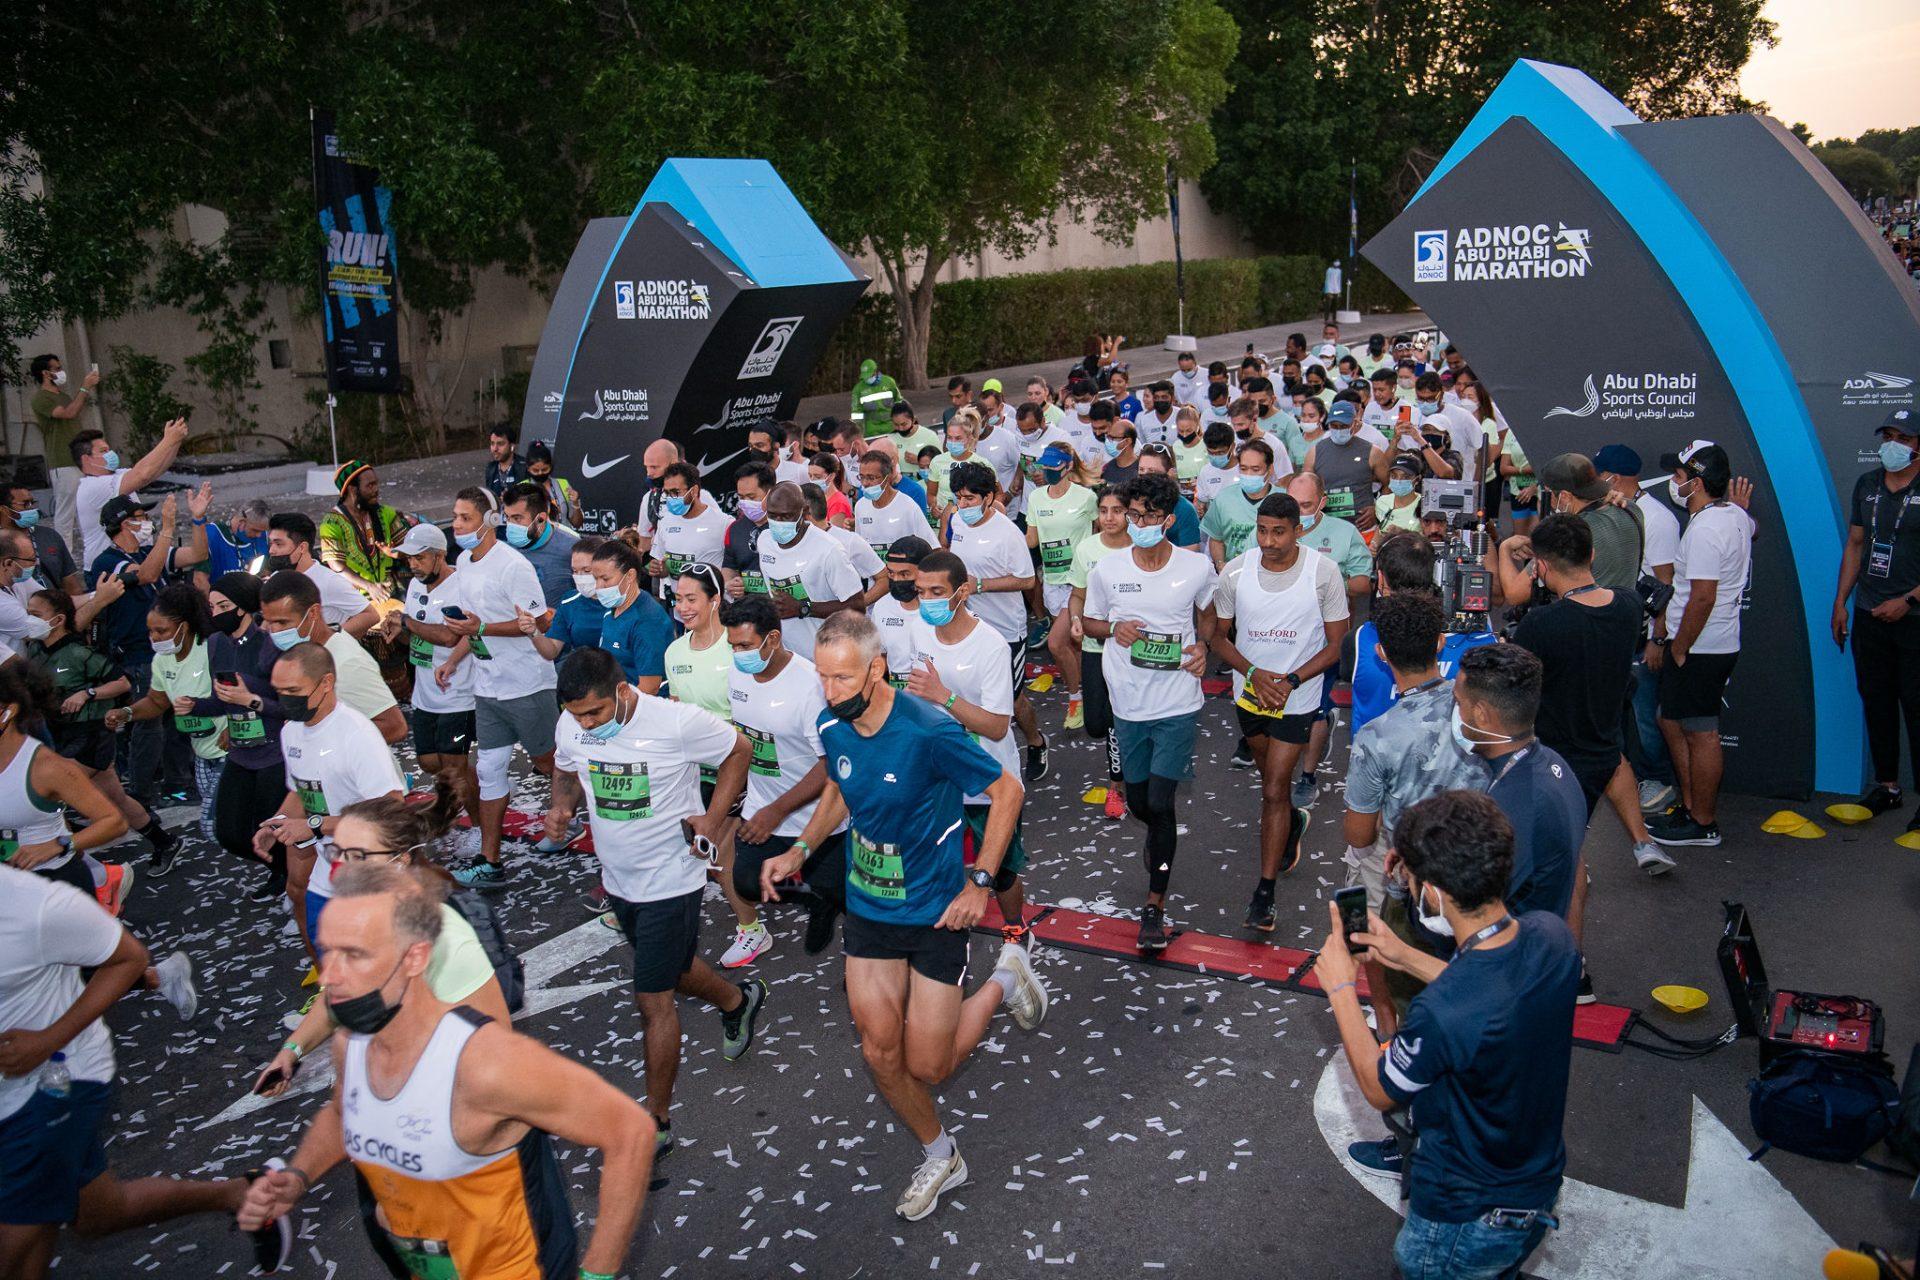 ADNOC Abu Dhabi Marathon road closures - Here’s what you need to know